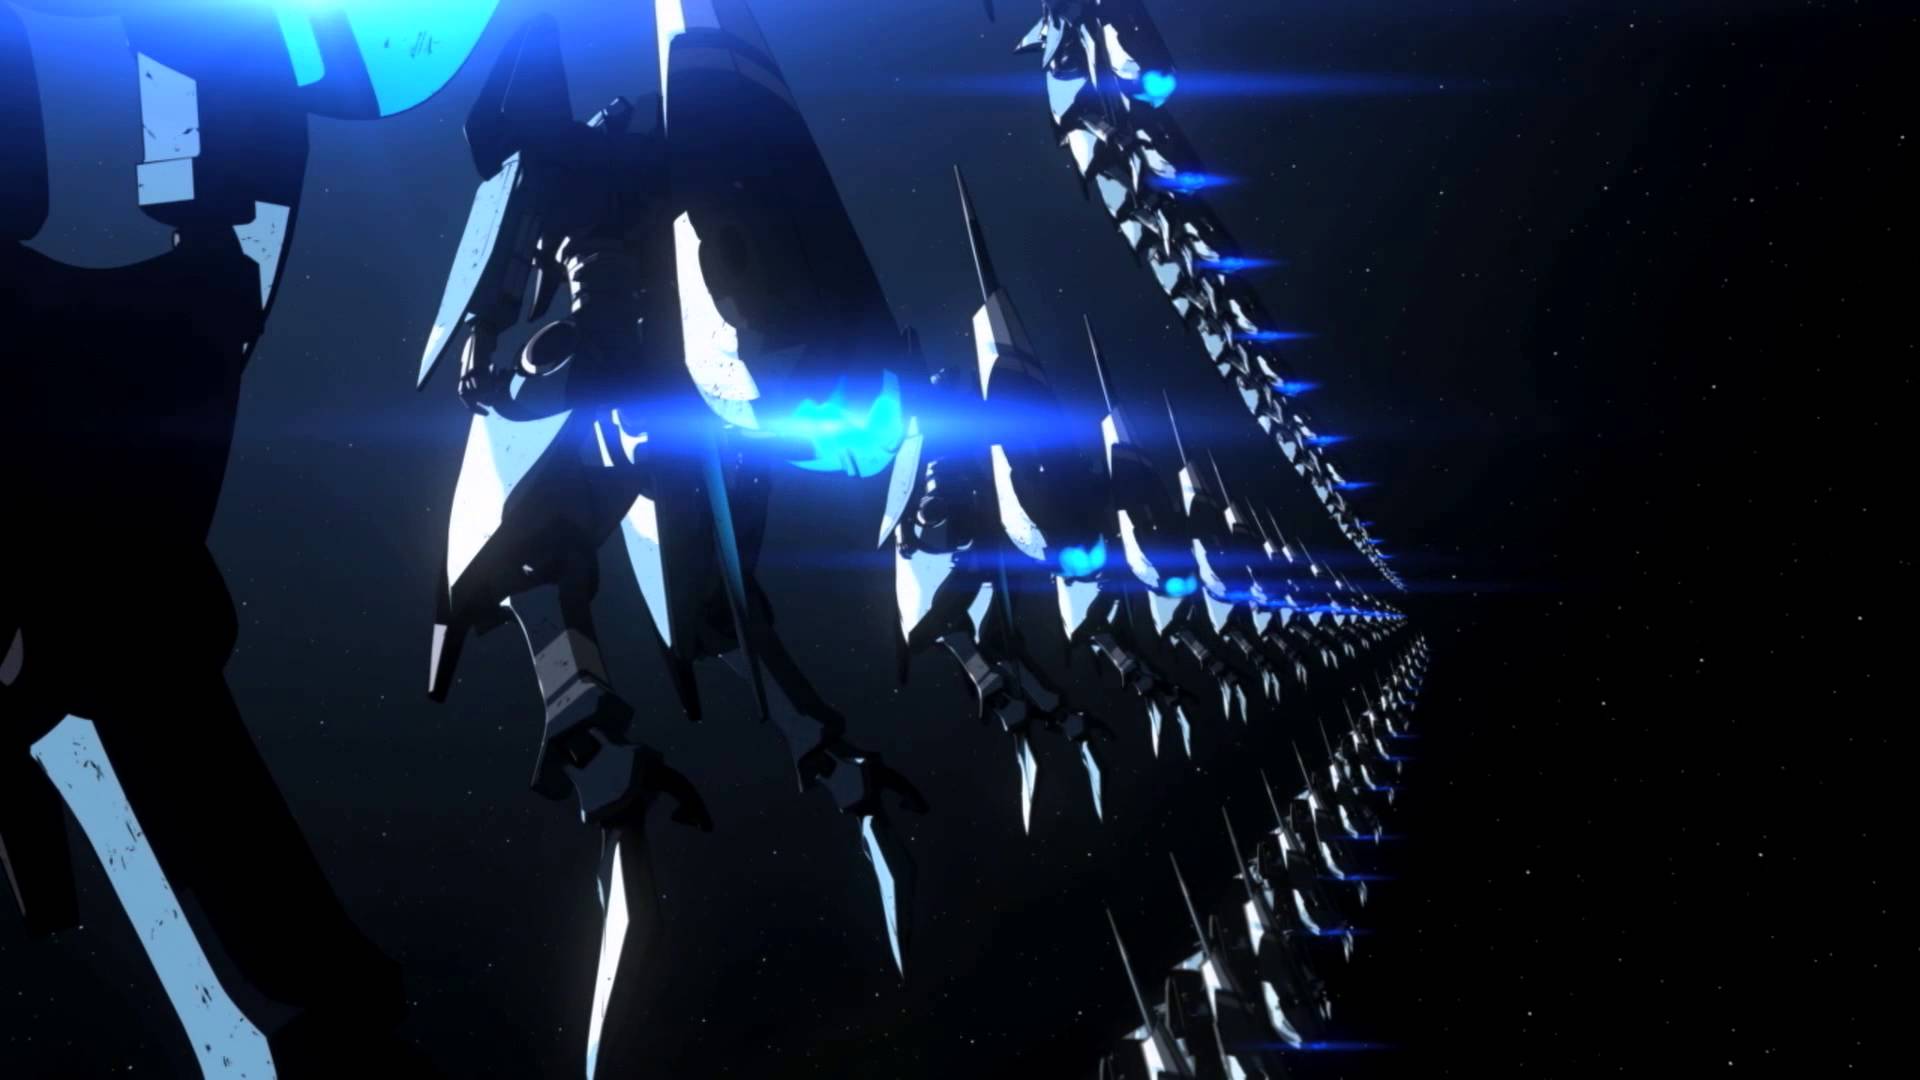 Trailer for “Knights of Sidonia”